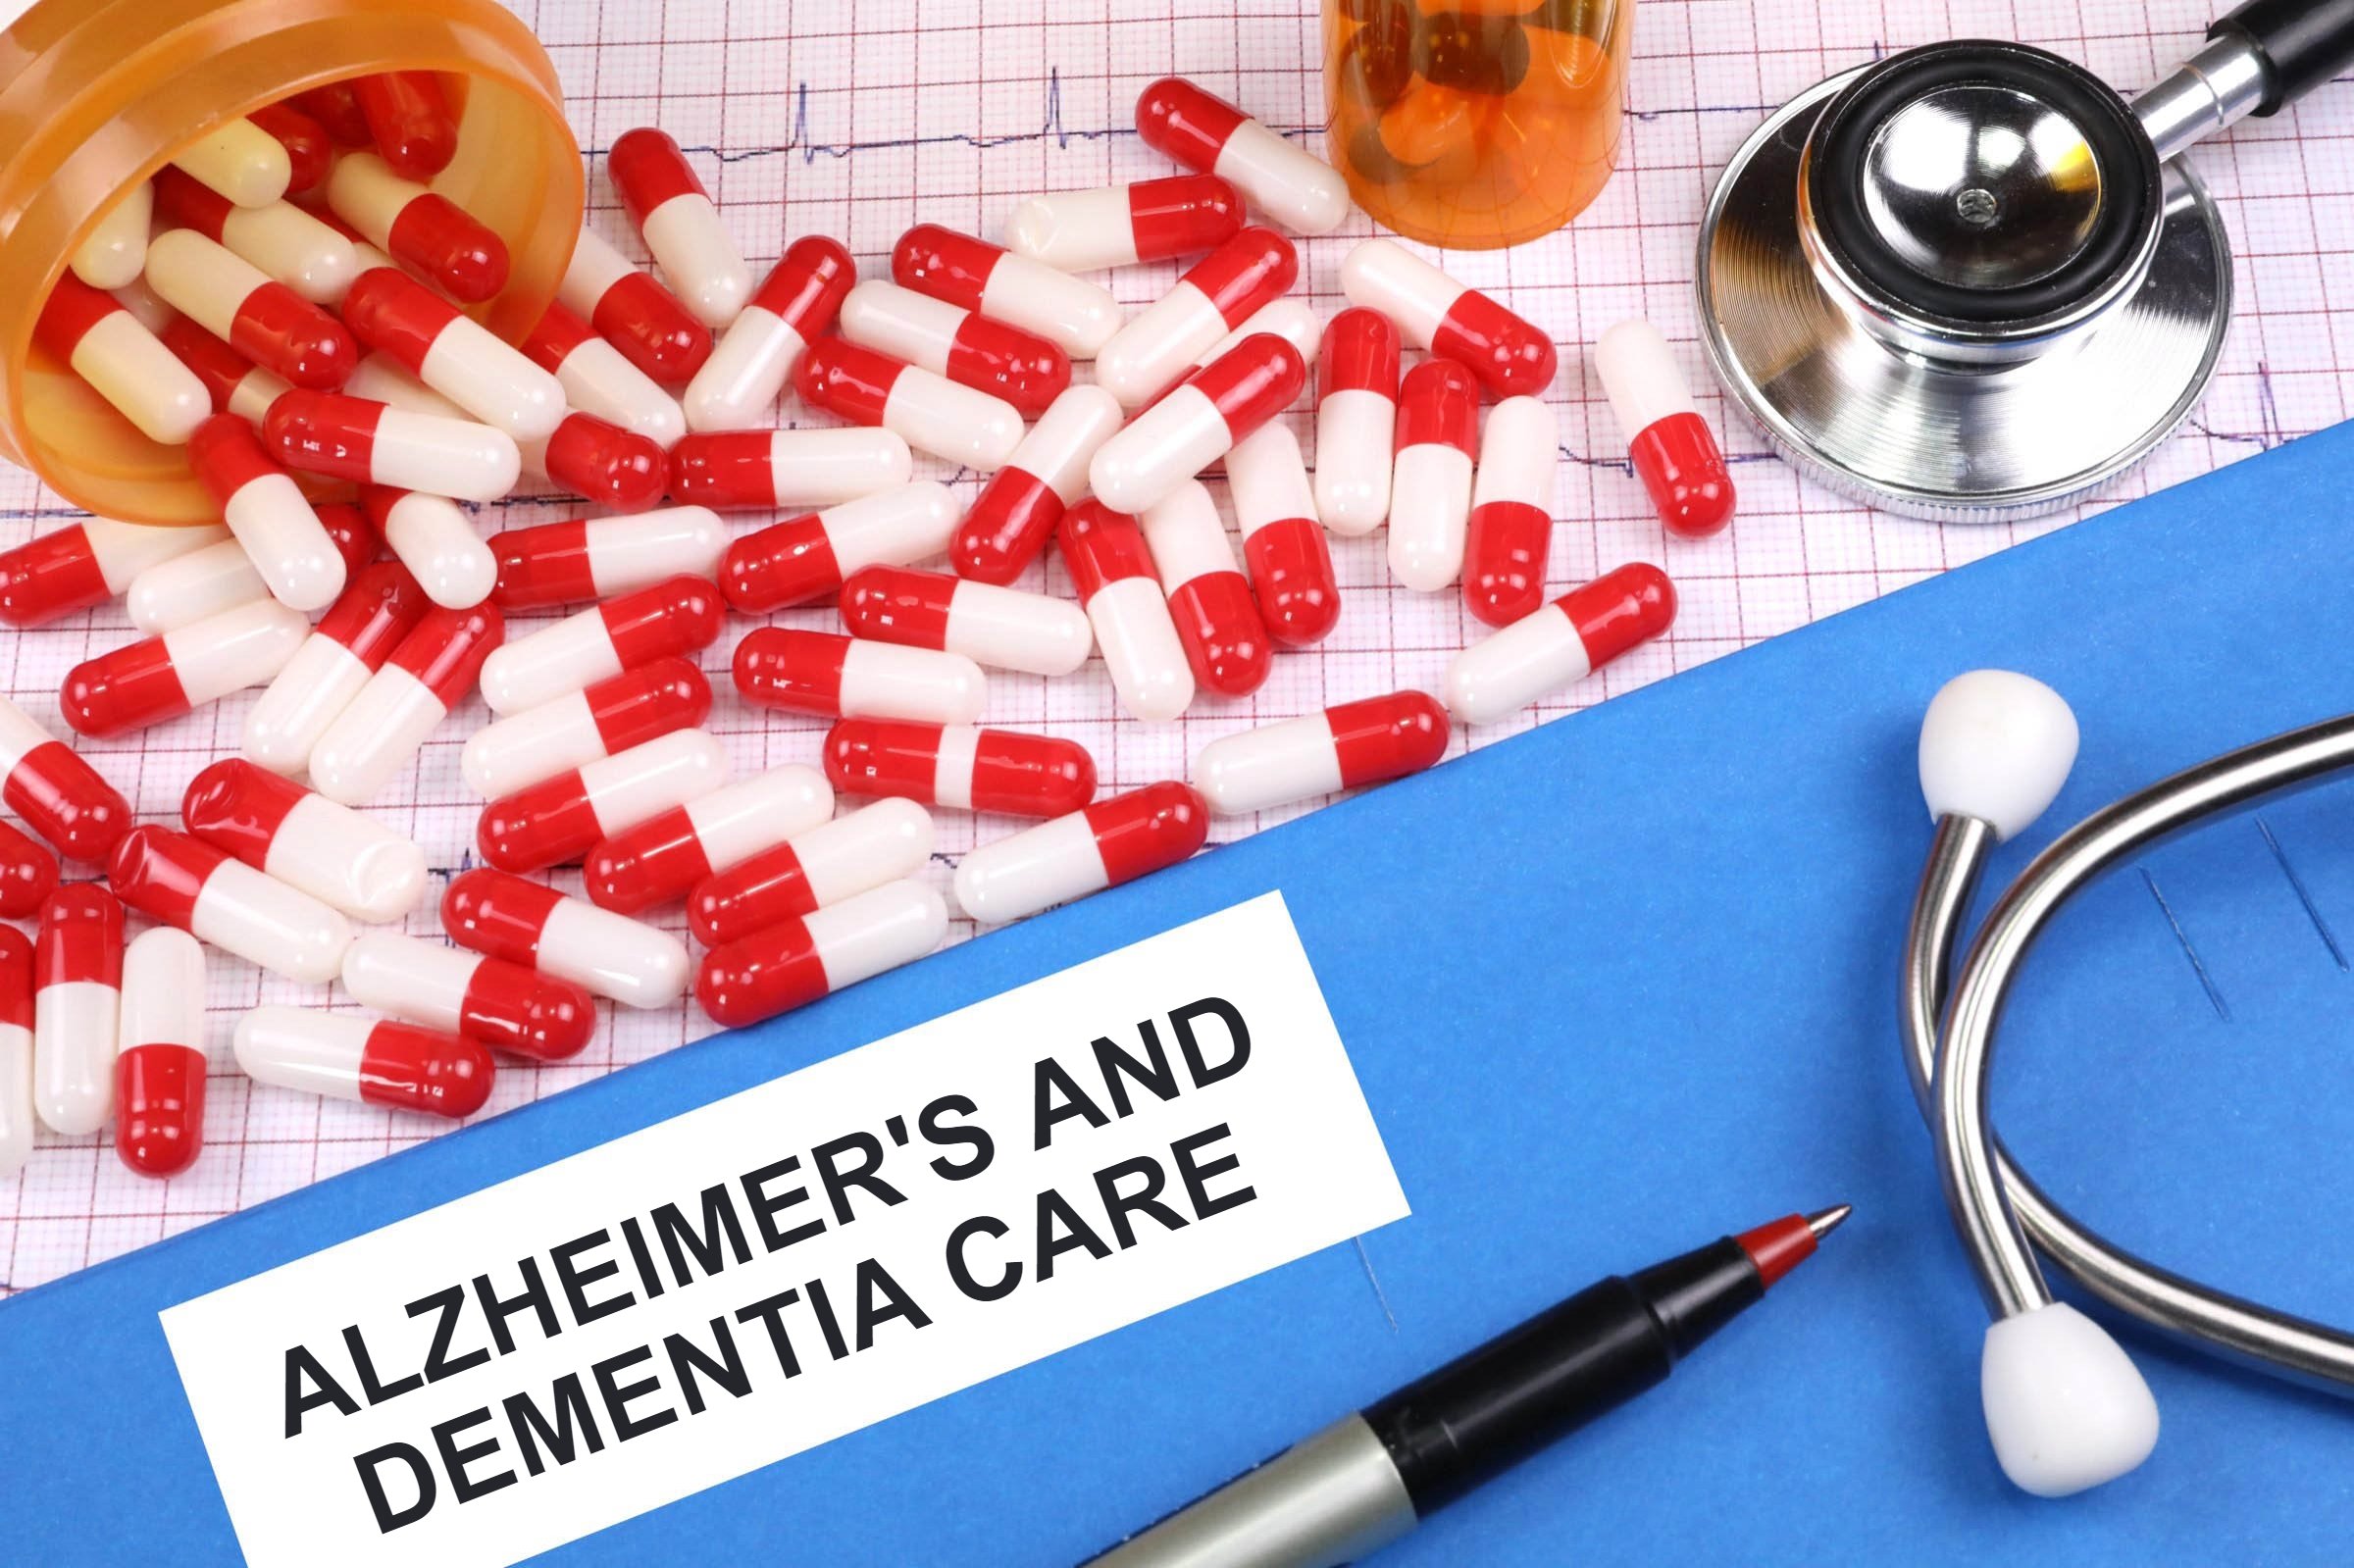 alzheimers and dementia care